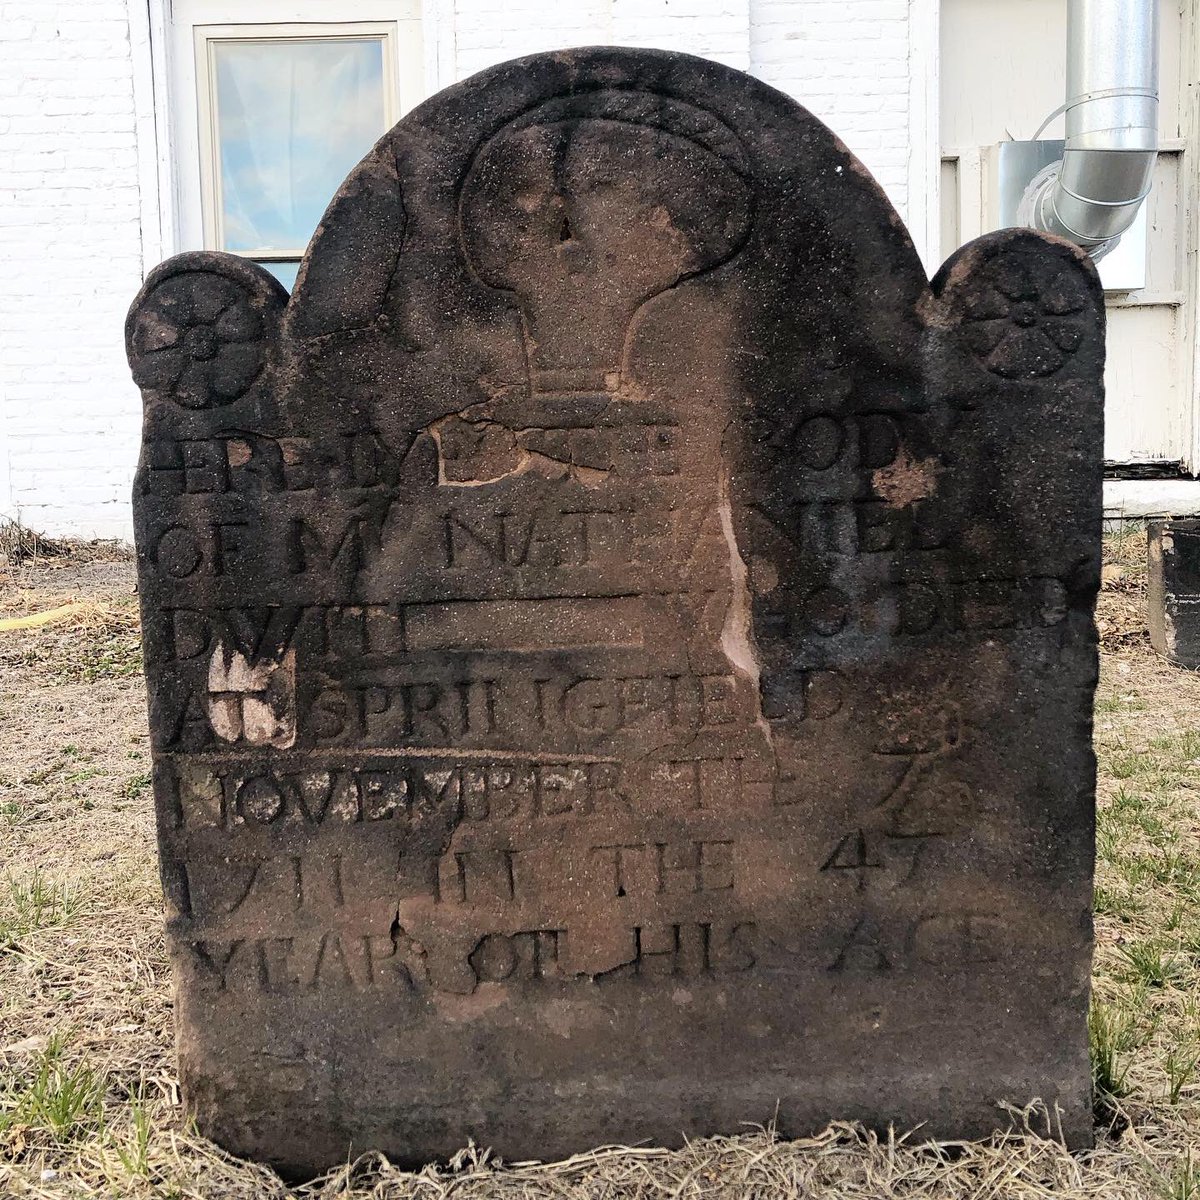 The oldest stone in West Springfield’s burying ground, carved for Nathaniel Dwight (1666-1711).

#VastEarlyAmerica #AmericanArt